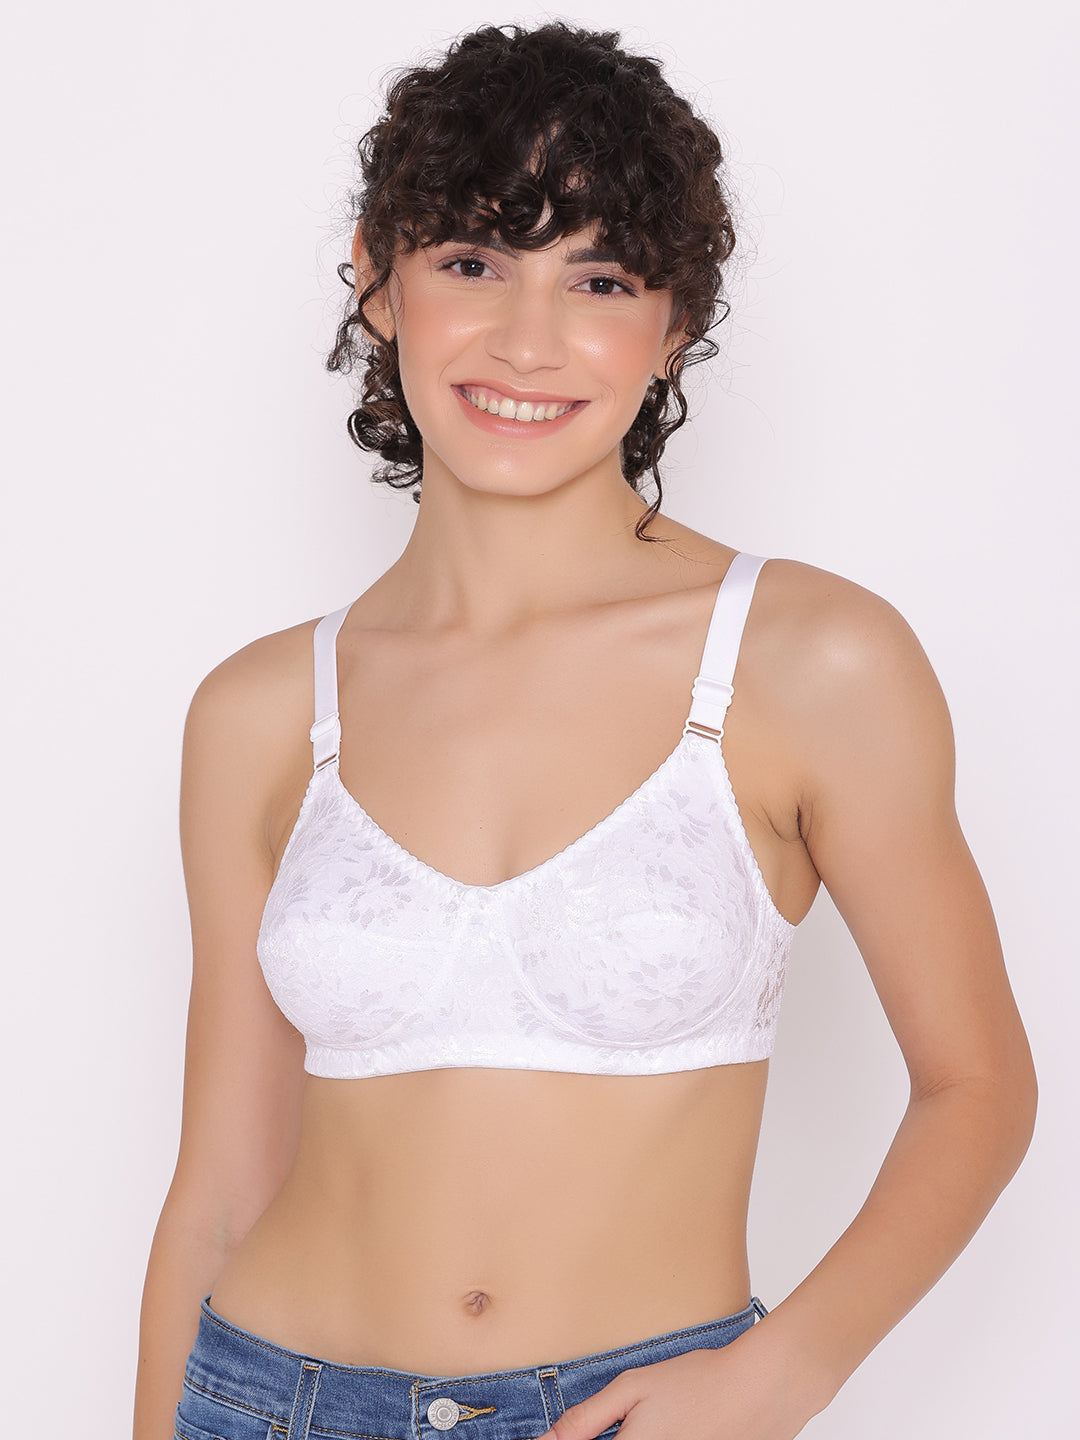 40d Womens Bras - Buy 40d Womens Bras Online at Best Prices In India